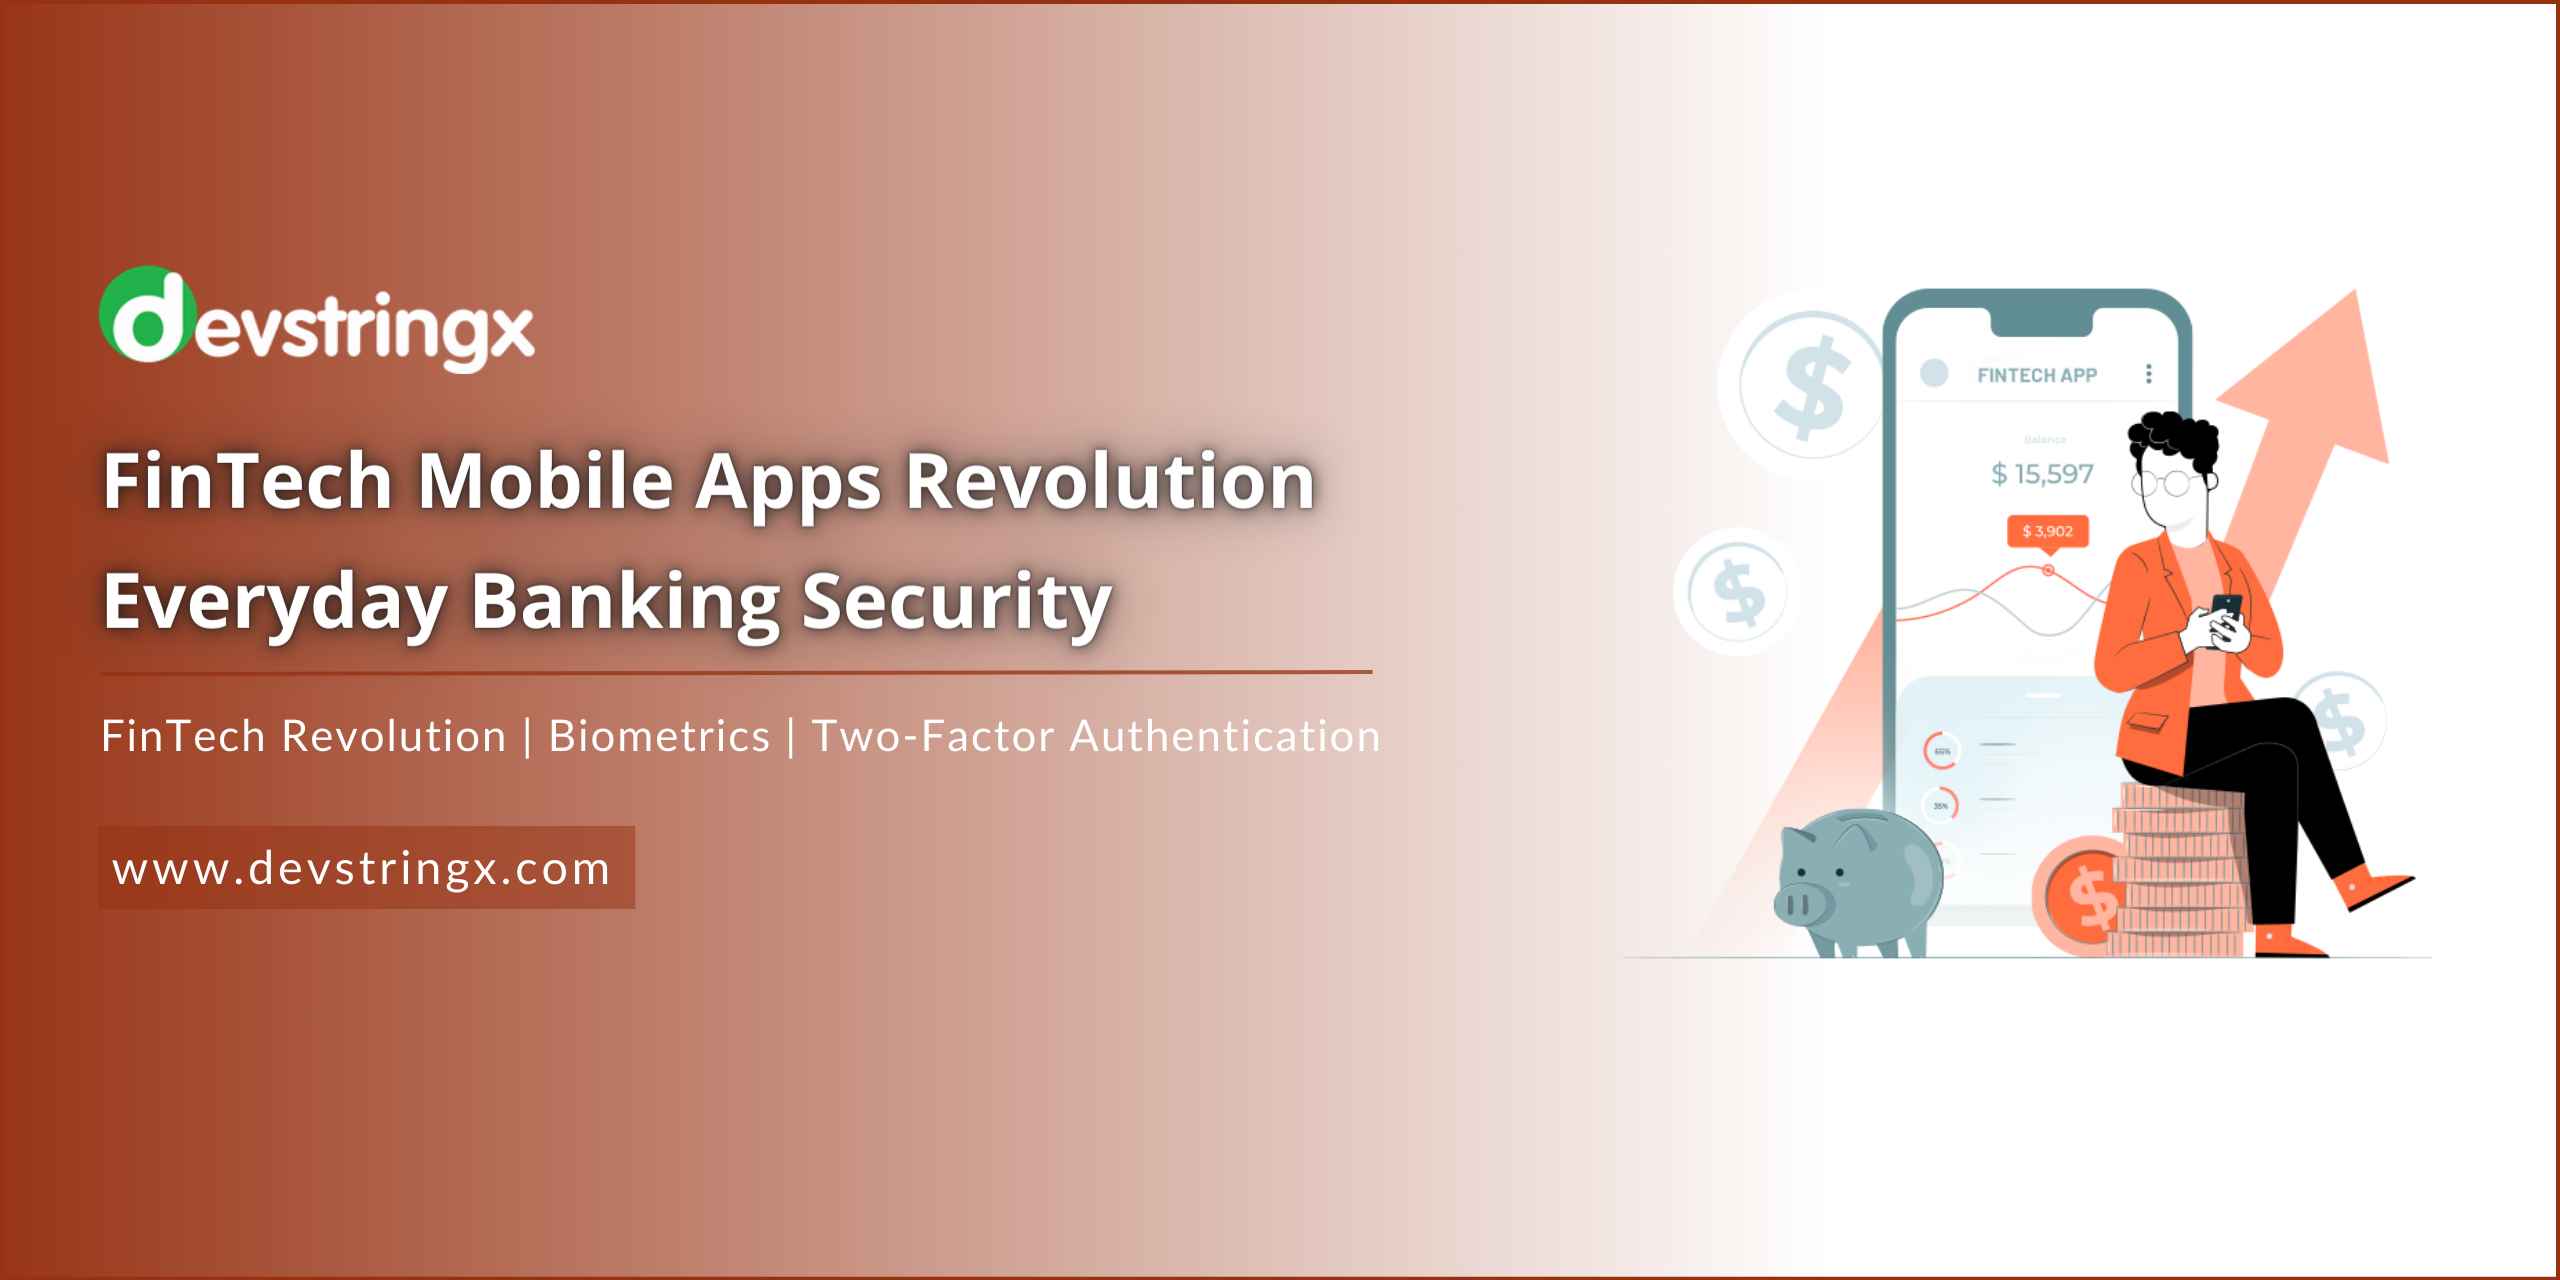 Feature image for banking security blog